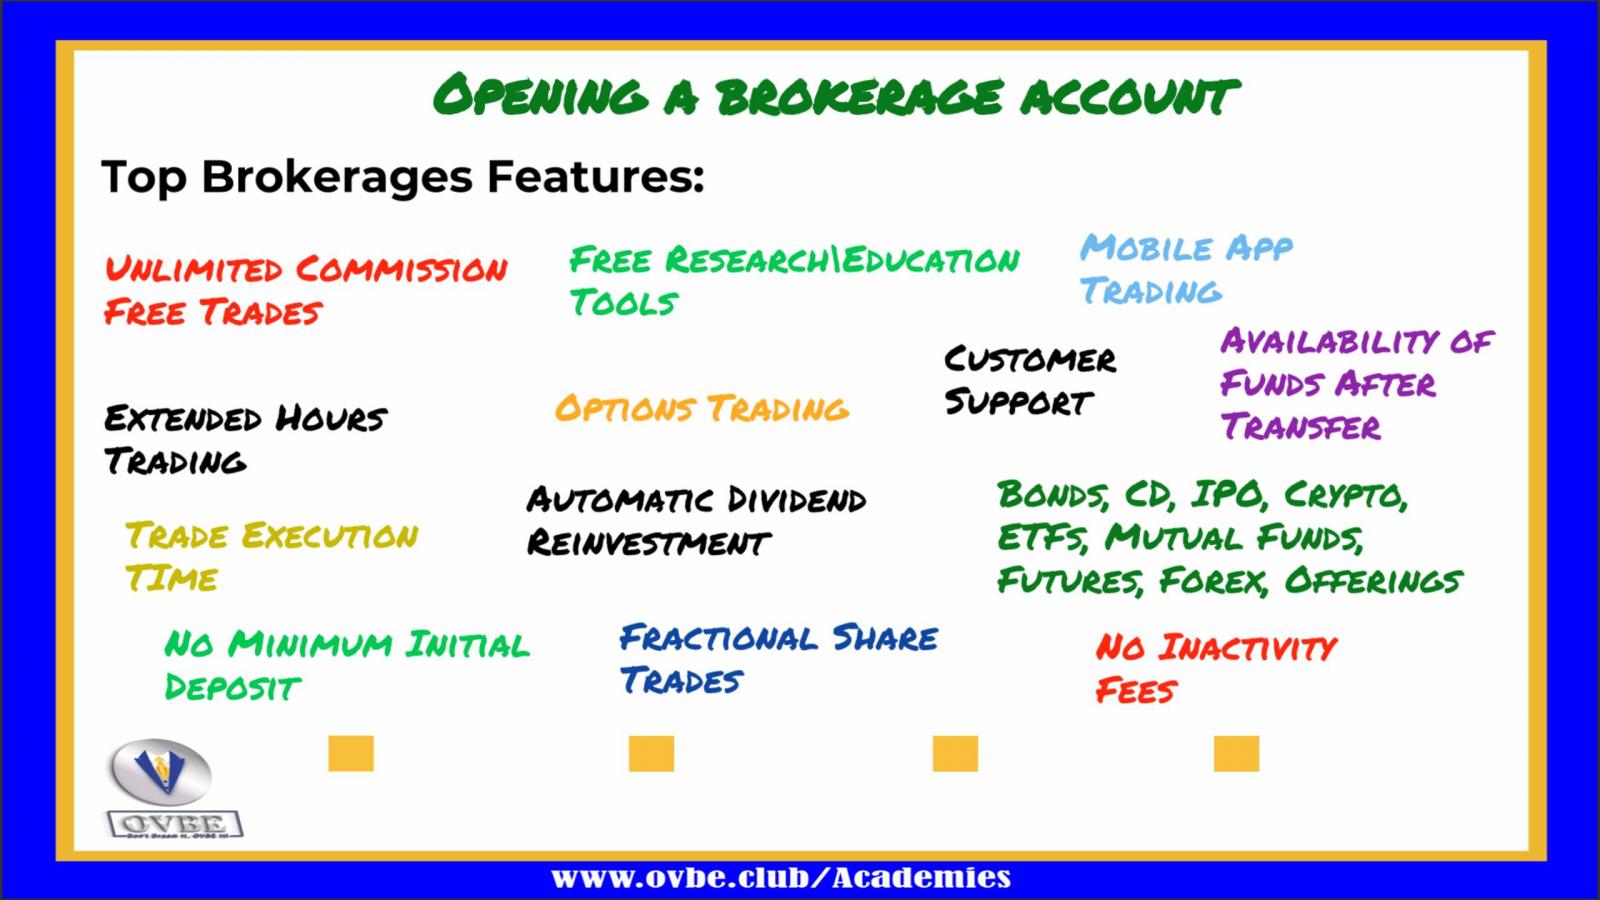 Opening A Brokerage Account pg. 6